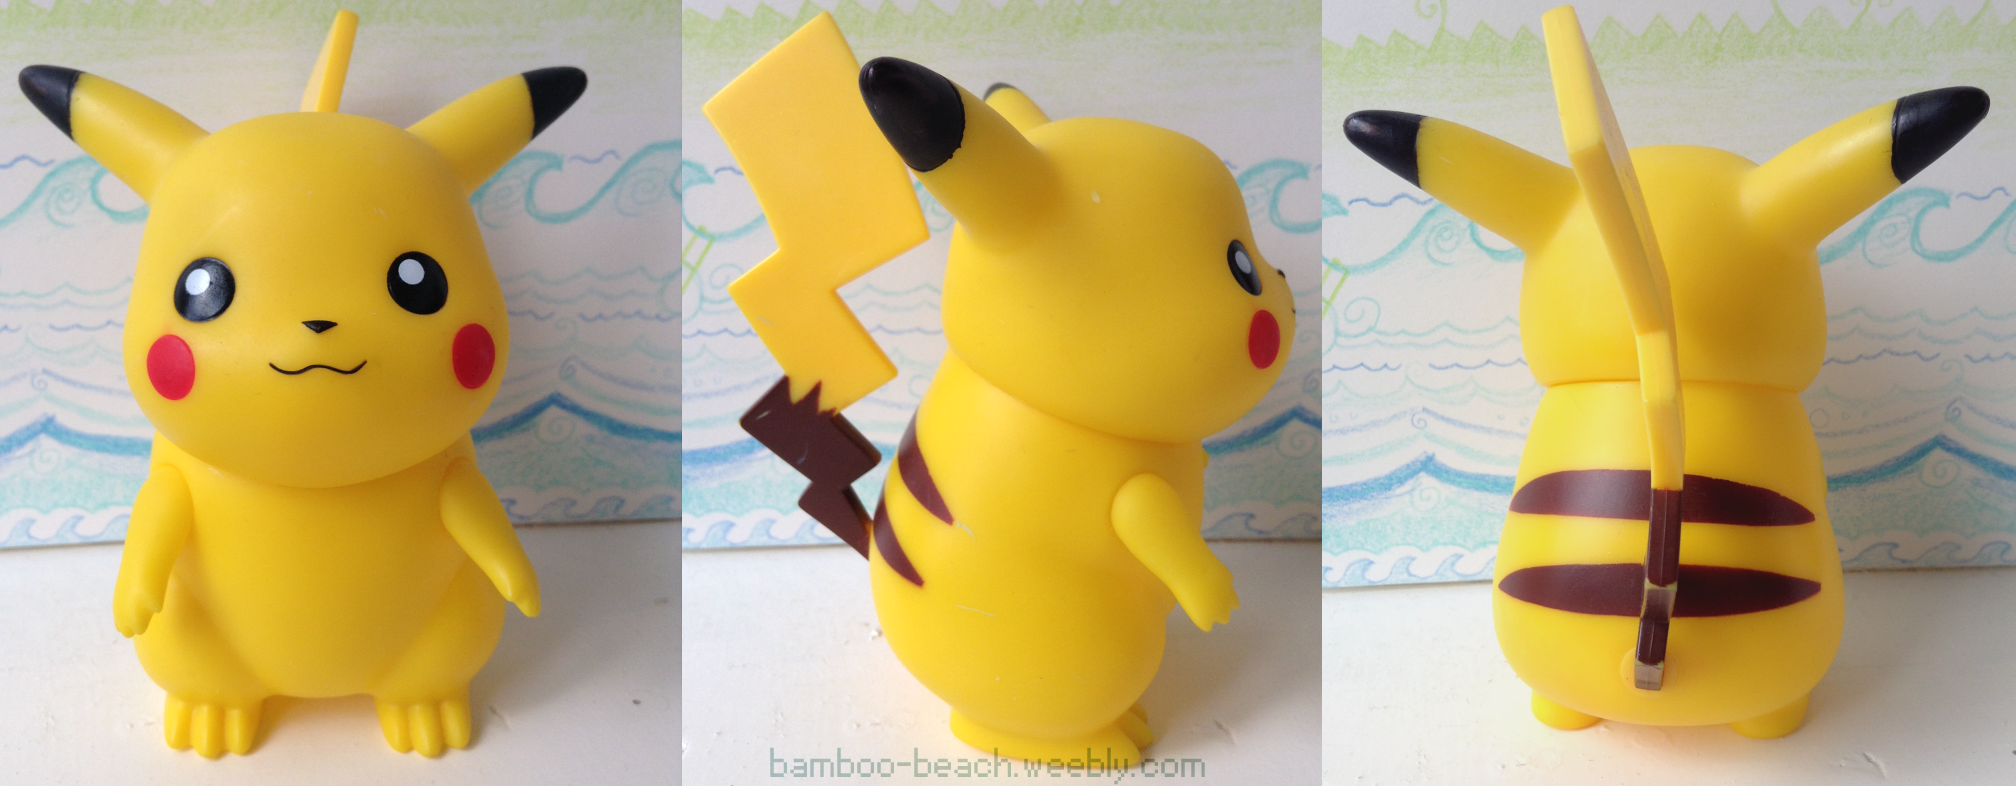 Can you spot what's wrong with this Pikachu? The Poke